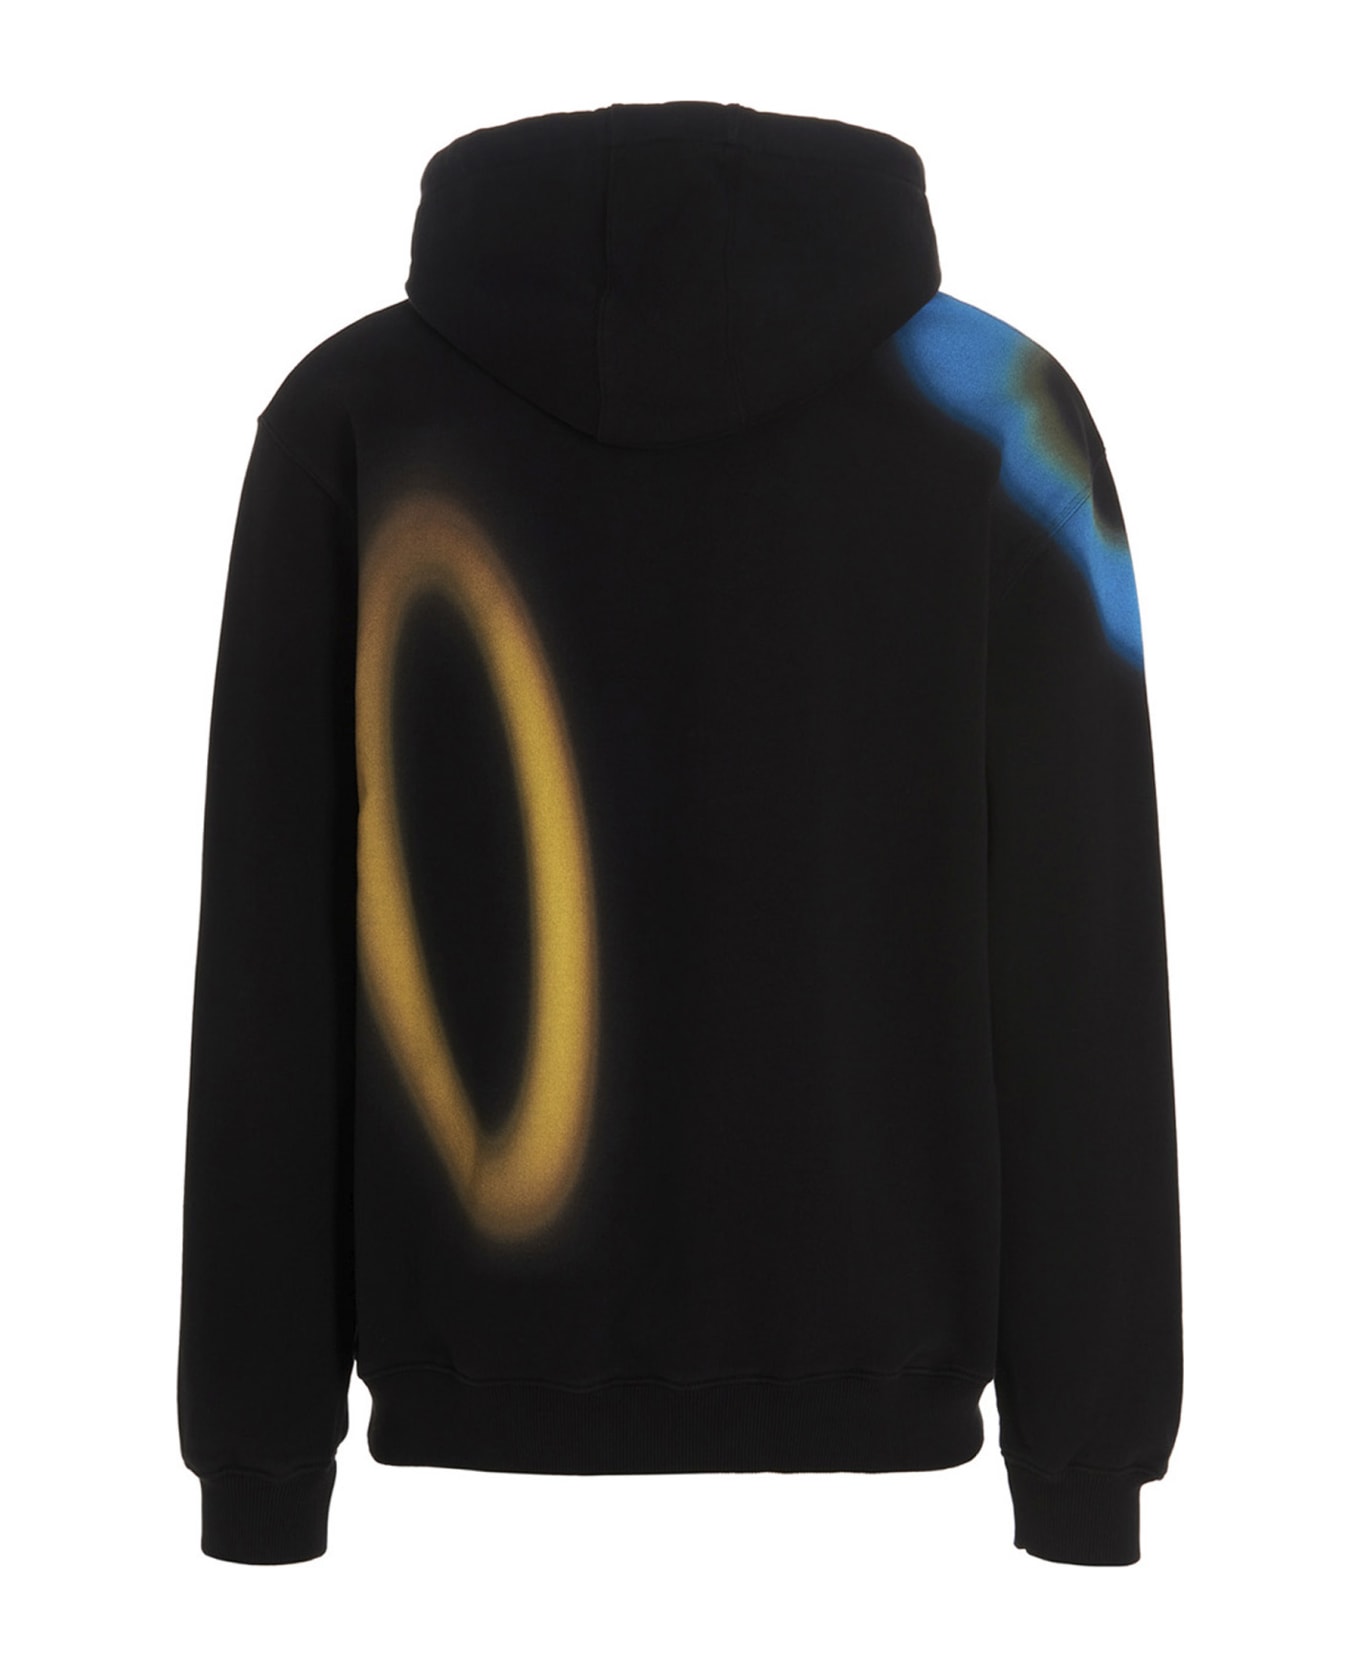 A-COLD-WALL 'hypergraphic' Hoodie - Black  